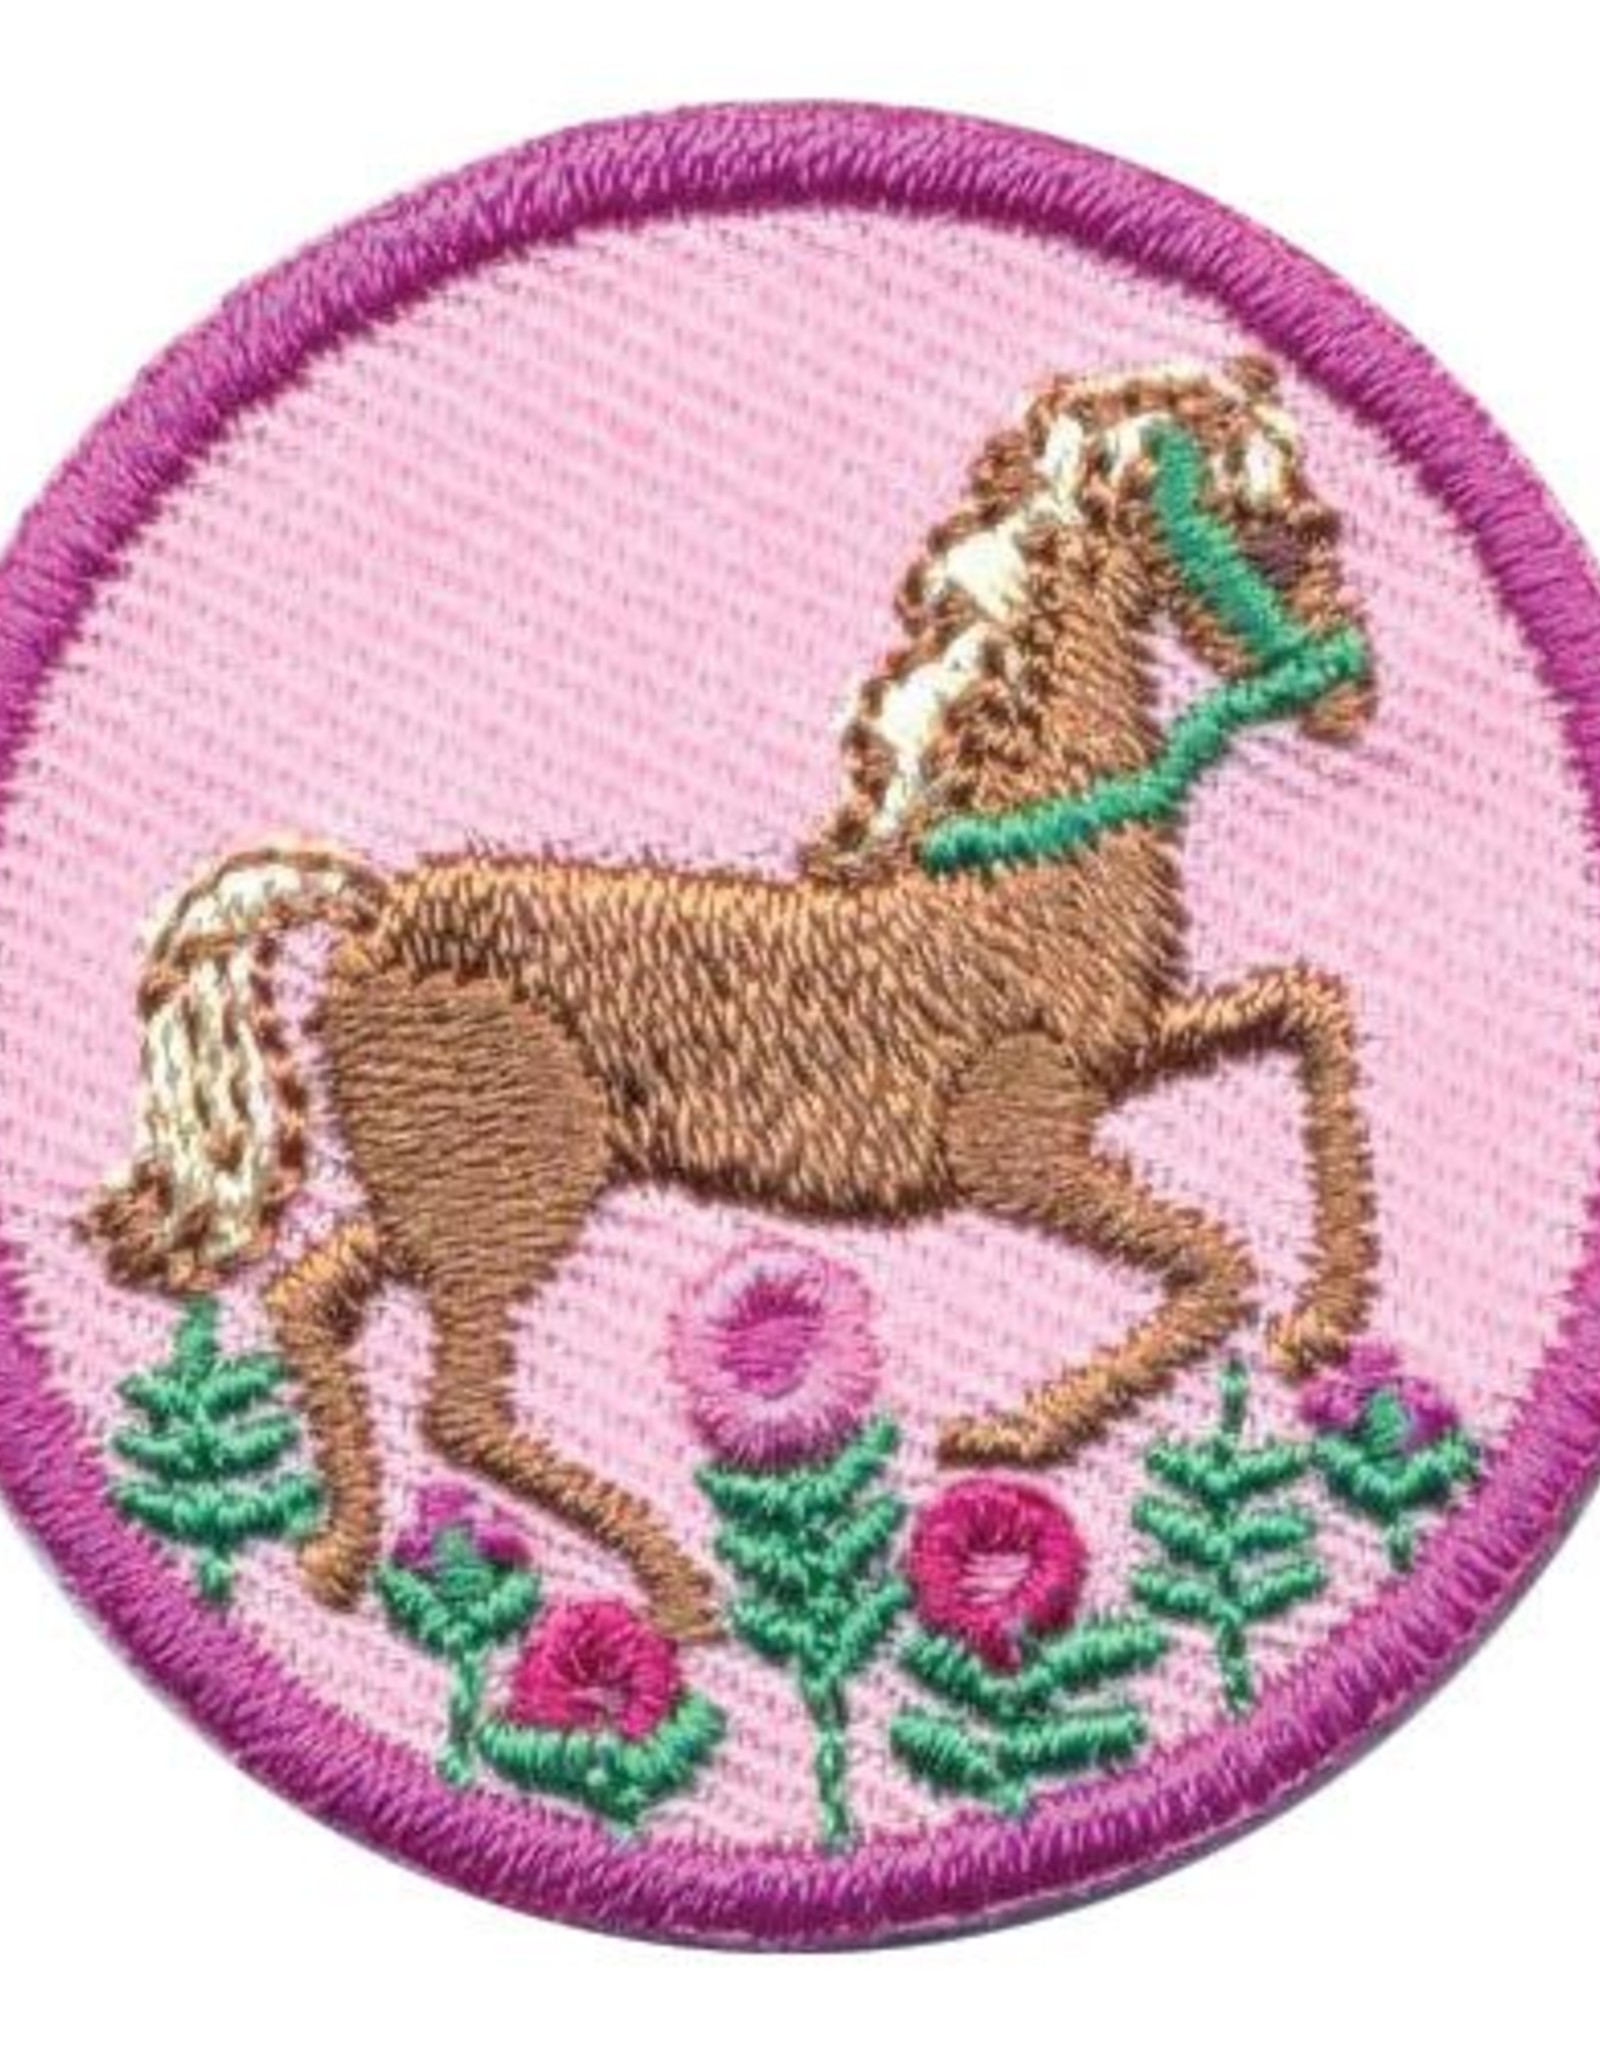 GIRL SCOUTS OF THE USA Junior Horseback Riding Badge